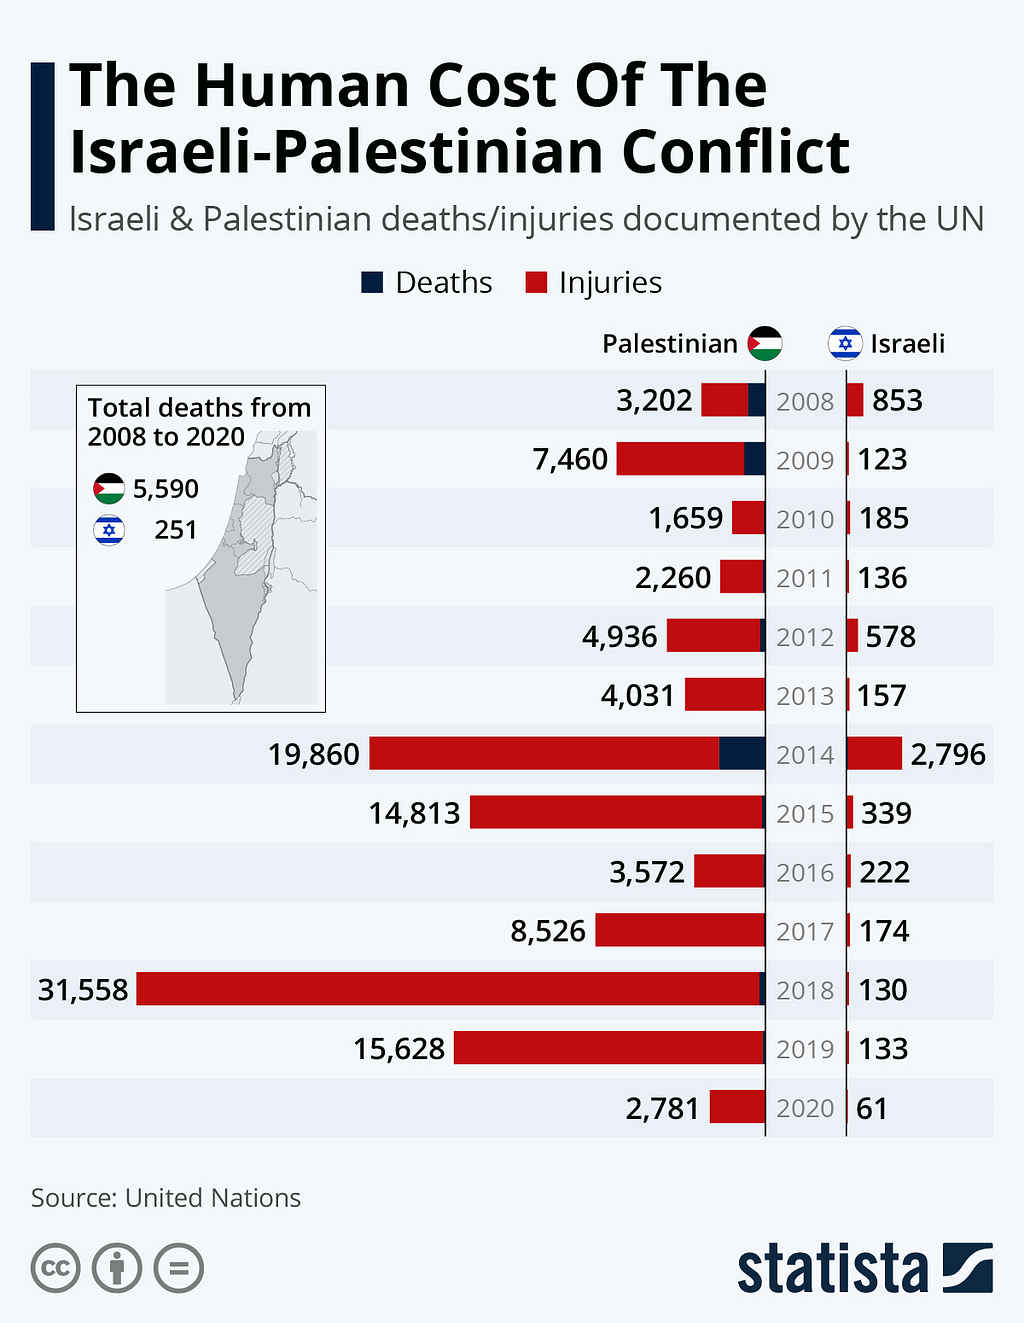 Palestine:Israel Death Ratio In Every Conflict